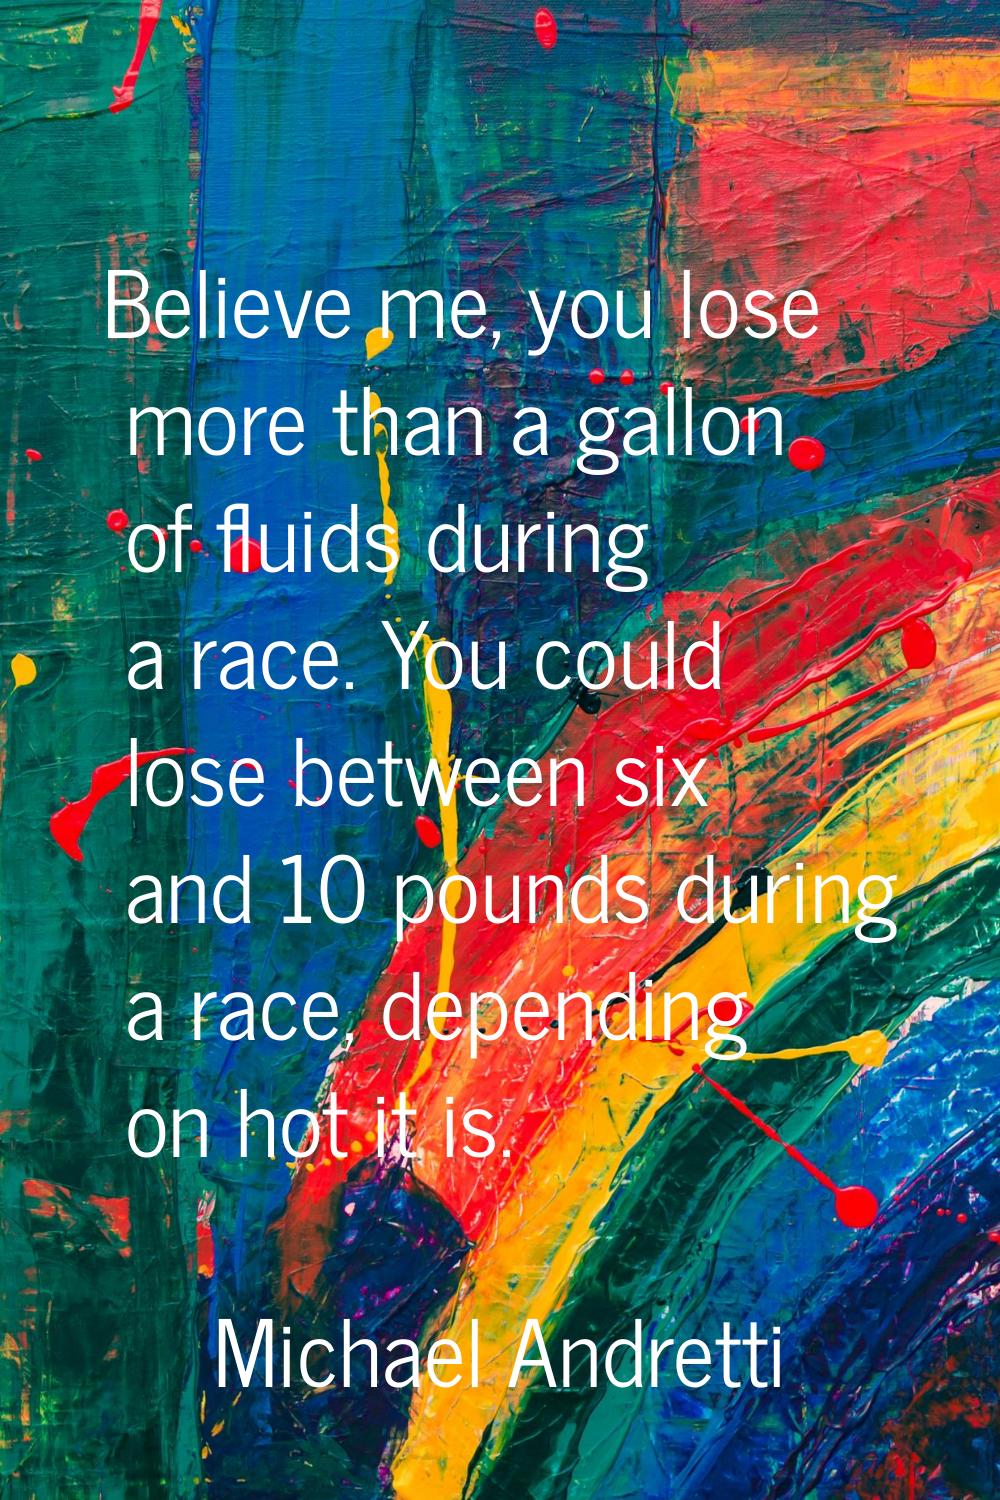 Believe me, you lose more than a gallon of fluids during a race. You could lose between six and 10 